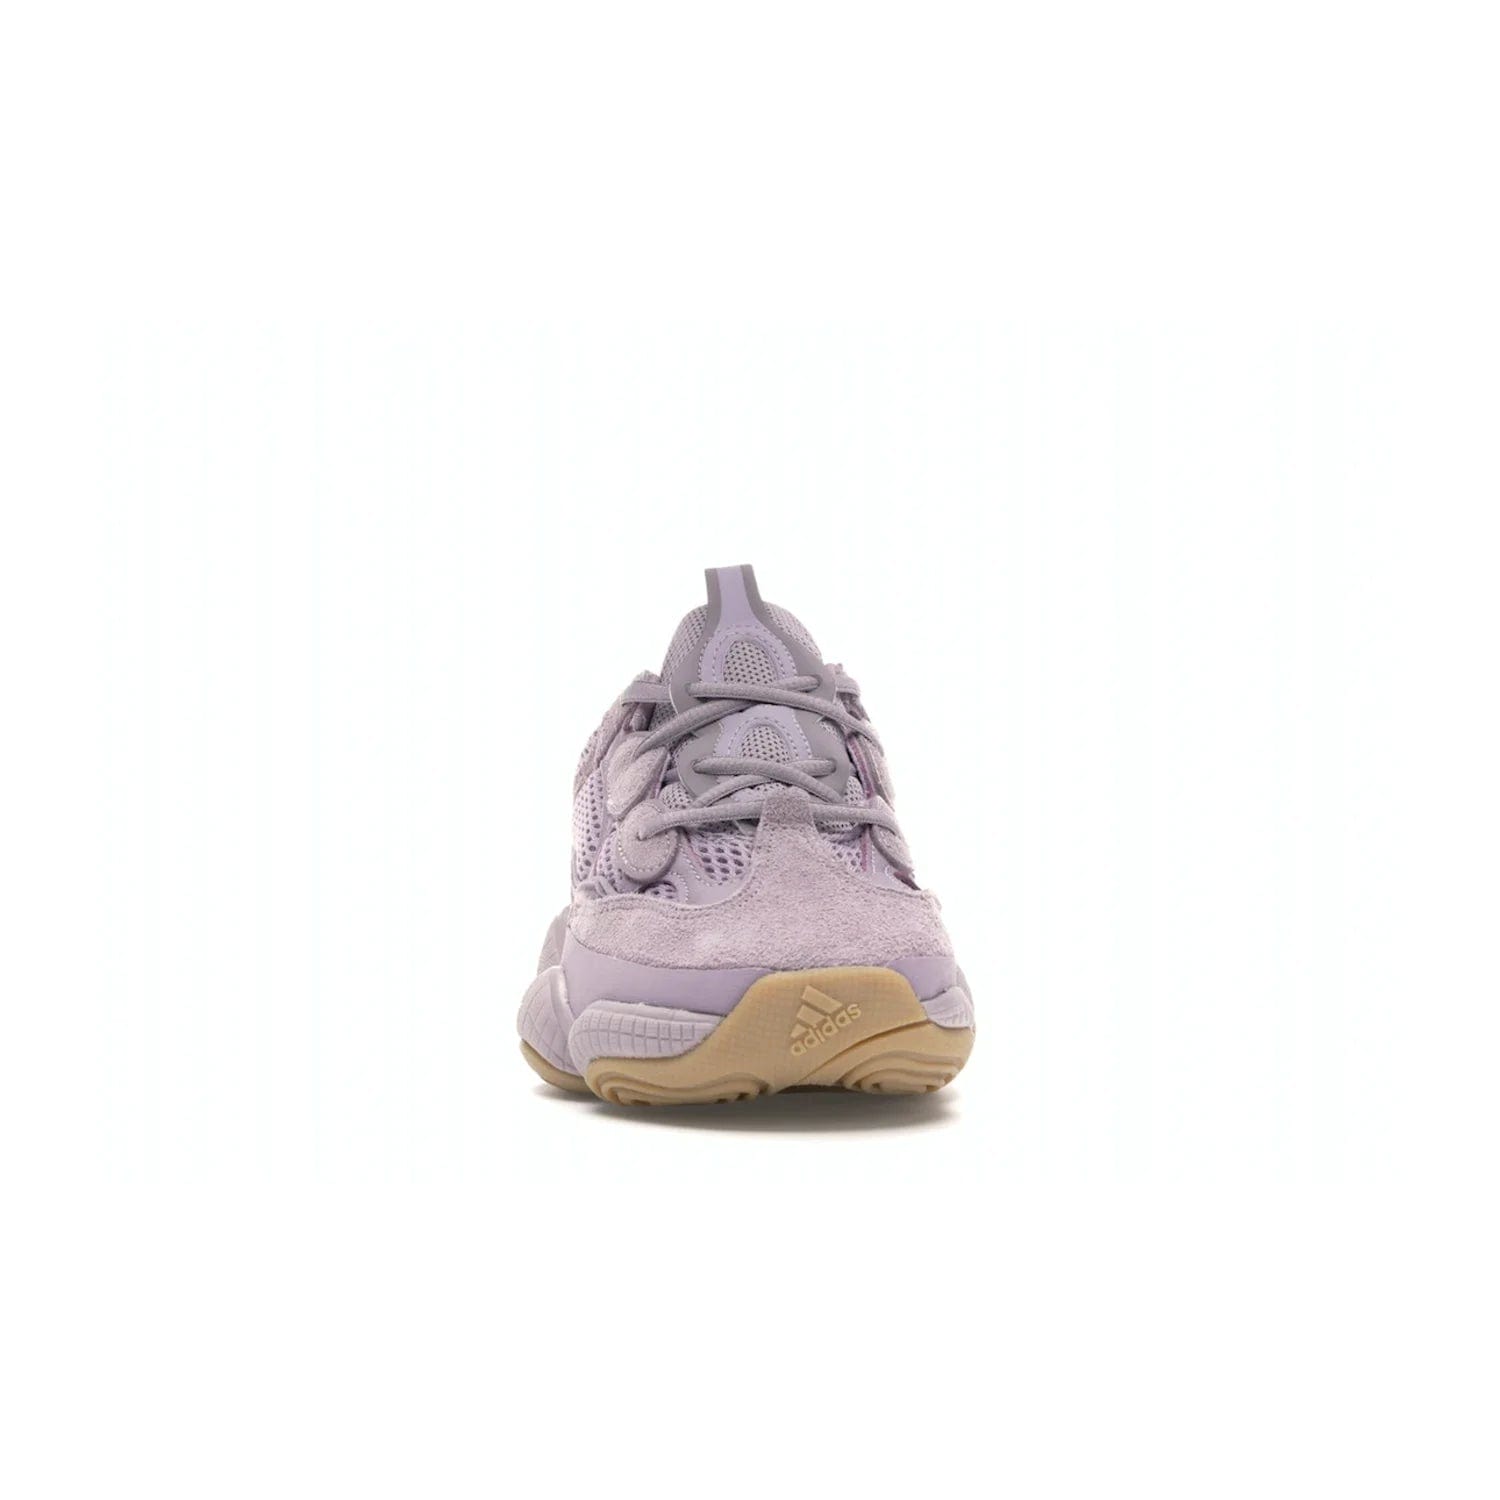 adidas Yeezy 500 Soft Vision - Image 9 - Only at www.BallersClubKickz.com - New adidas Yeezy 500 Soft Vision sneaker featuring a combination of mesh, leather, and suede in a classic Soft Vision colorway. Gum rubber outsole ensures durability and traction. An everyday sneaker that stands out from the crowd.